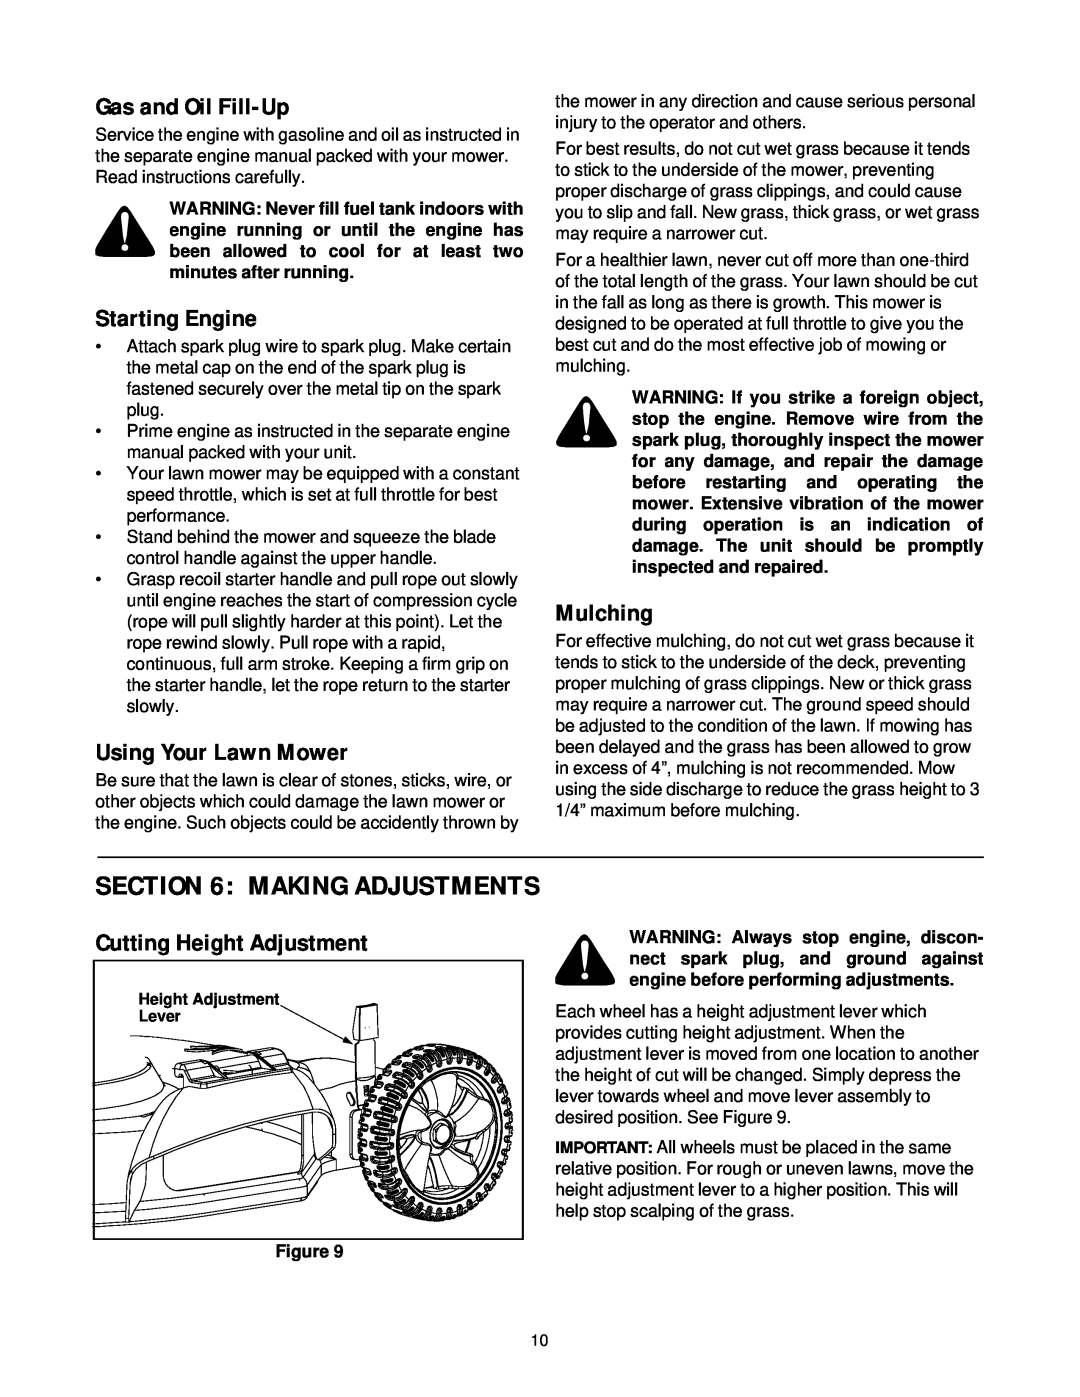 MTD 080 Thru 099 manual Making Adjustments, Gas and Oil Fill-Up, Starting Engine, Using Your Lawn Mower, Mulching 